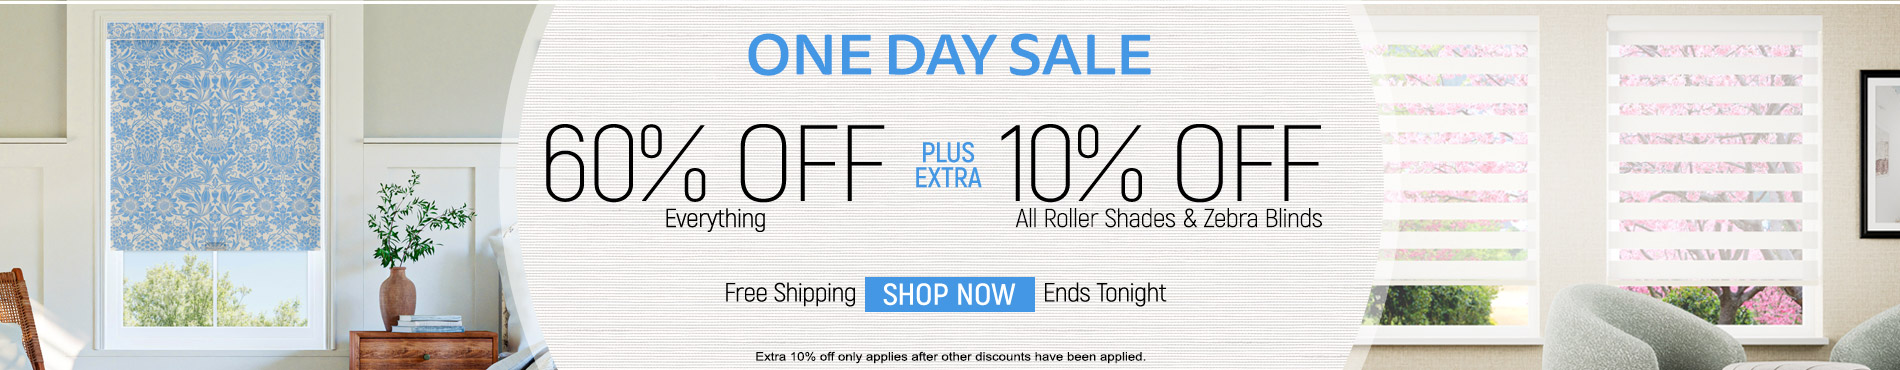 60% off everything plus extra 10% off roller shades